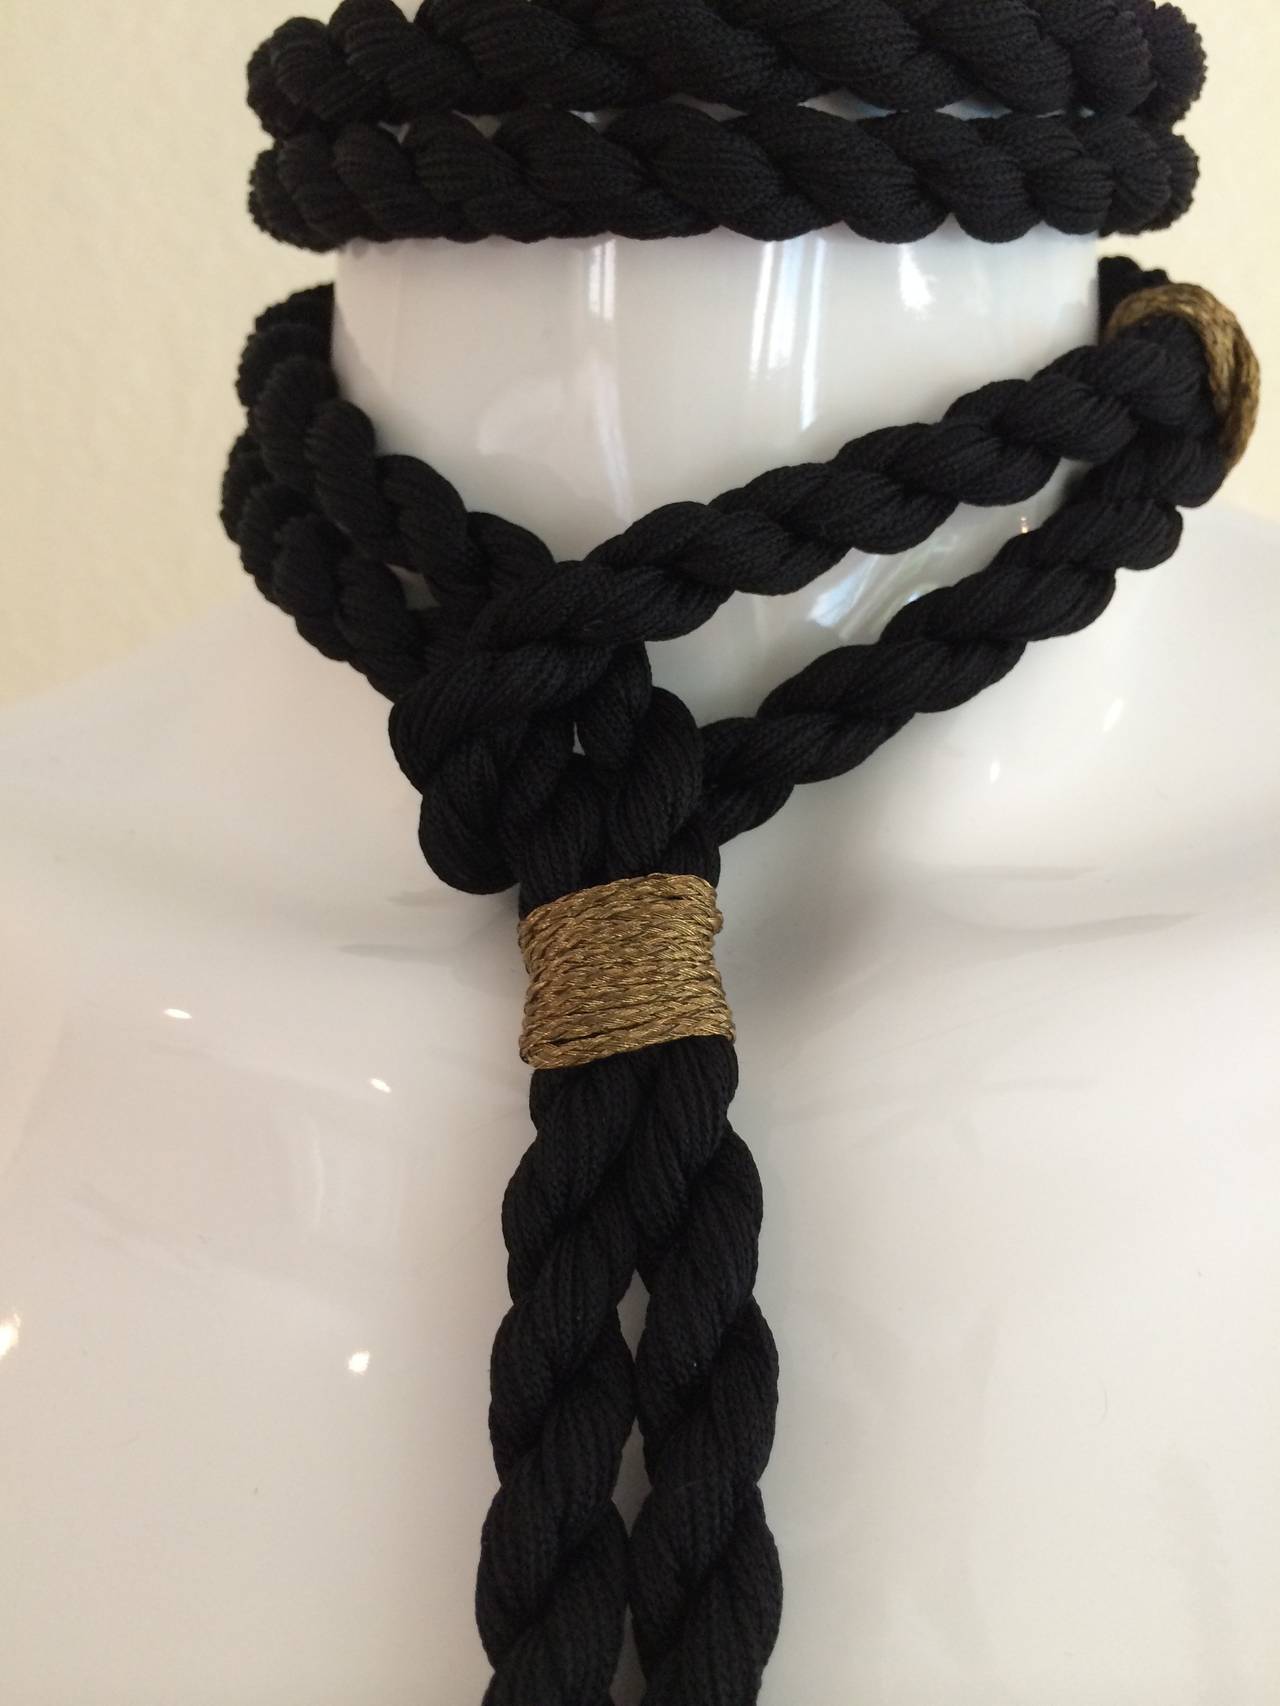 A Beautiful black and gold trim rope and tassel accessory from Yves Saint Laurent. Wear it as a necklace  or a belt. 34 inches long and the tassel alone is 6 inches. Excellent condition.